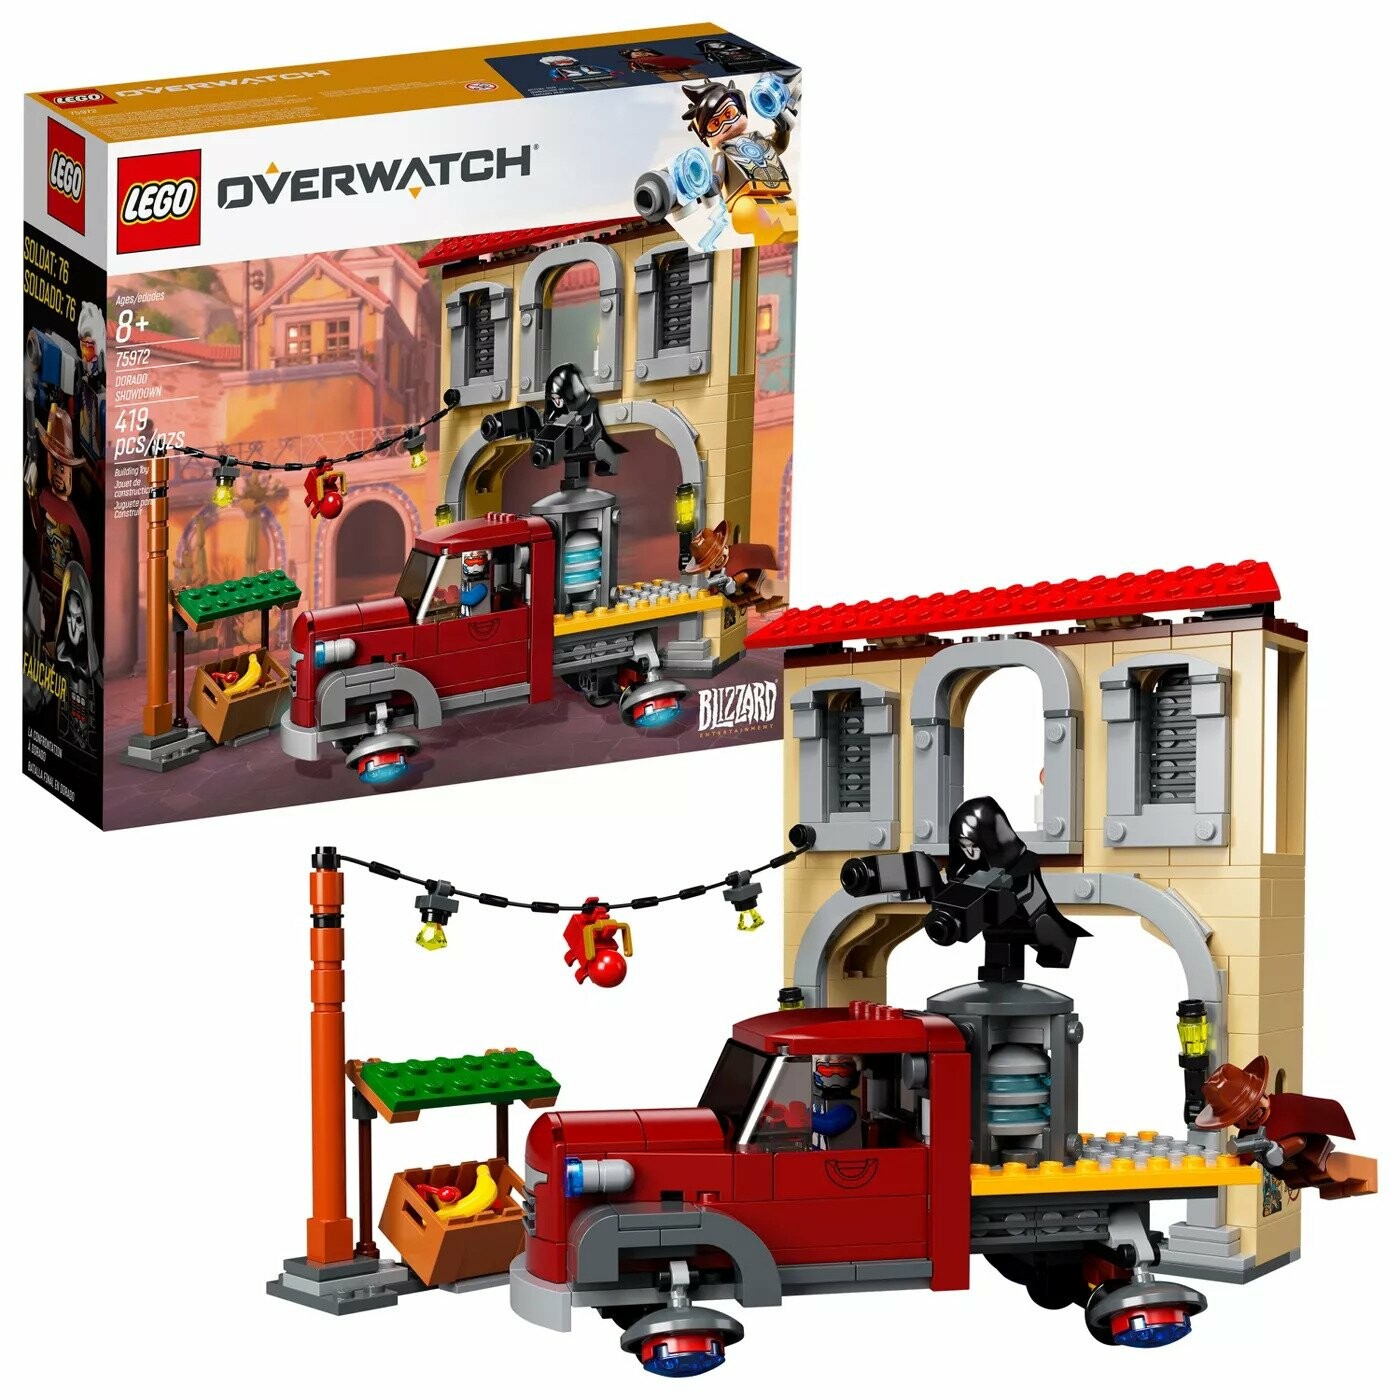 EXTRA:
Could not resist showing this here, LEGO made a set featuring the payload I worked on! :D